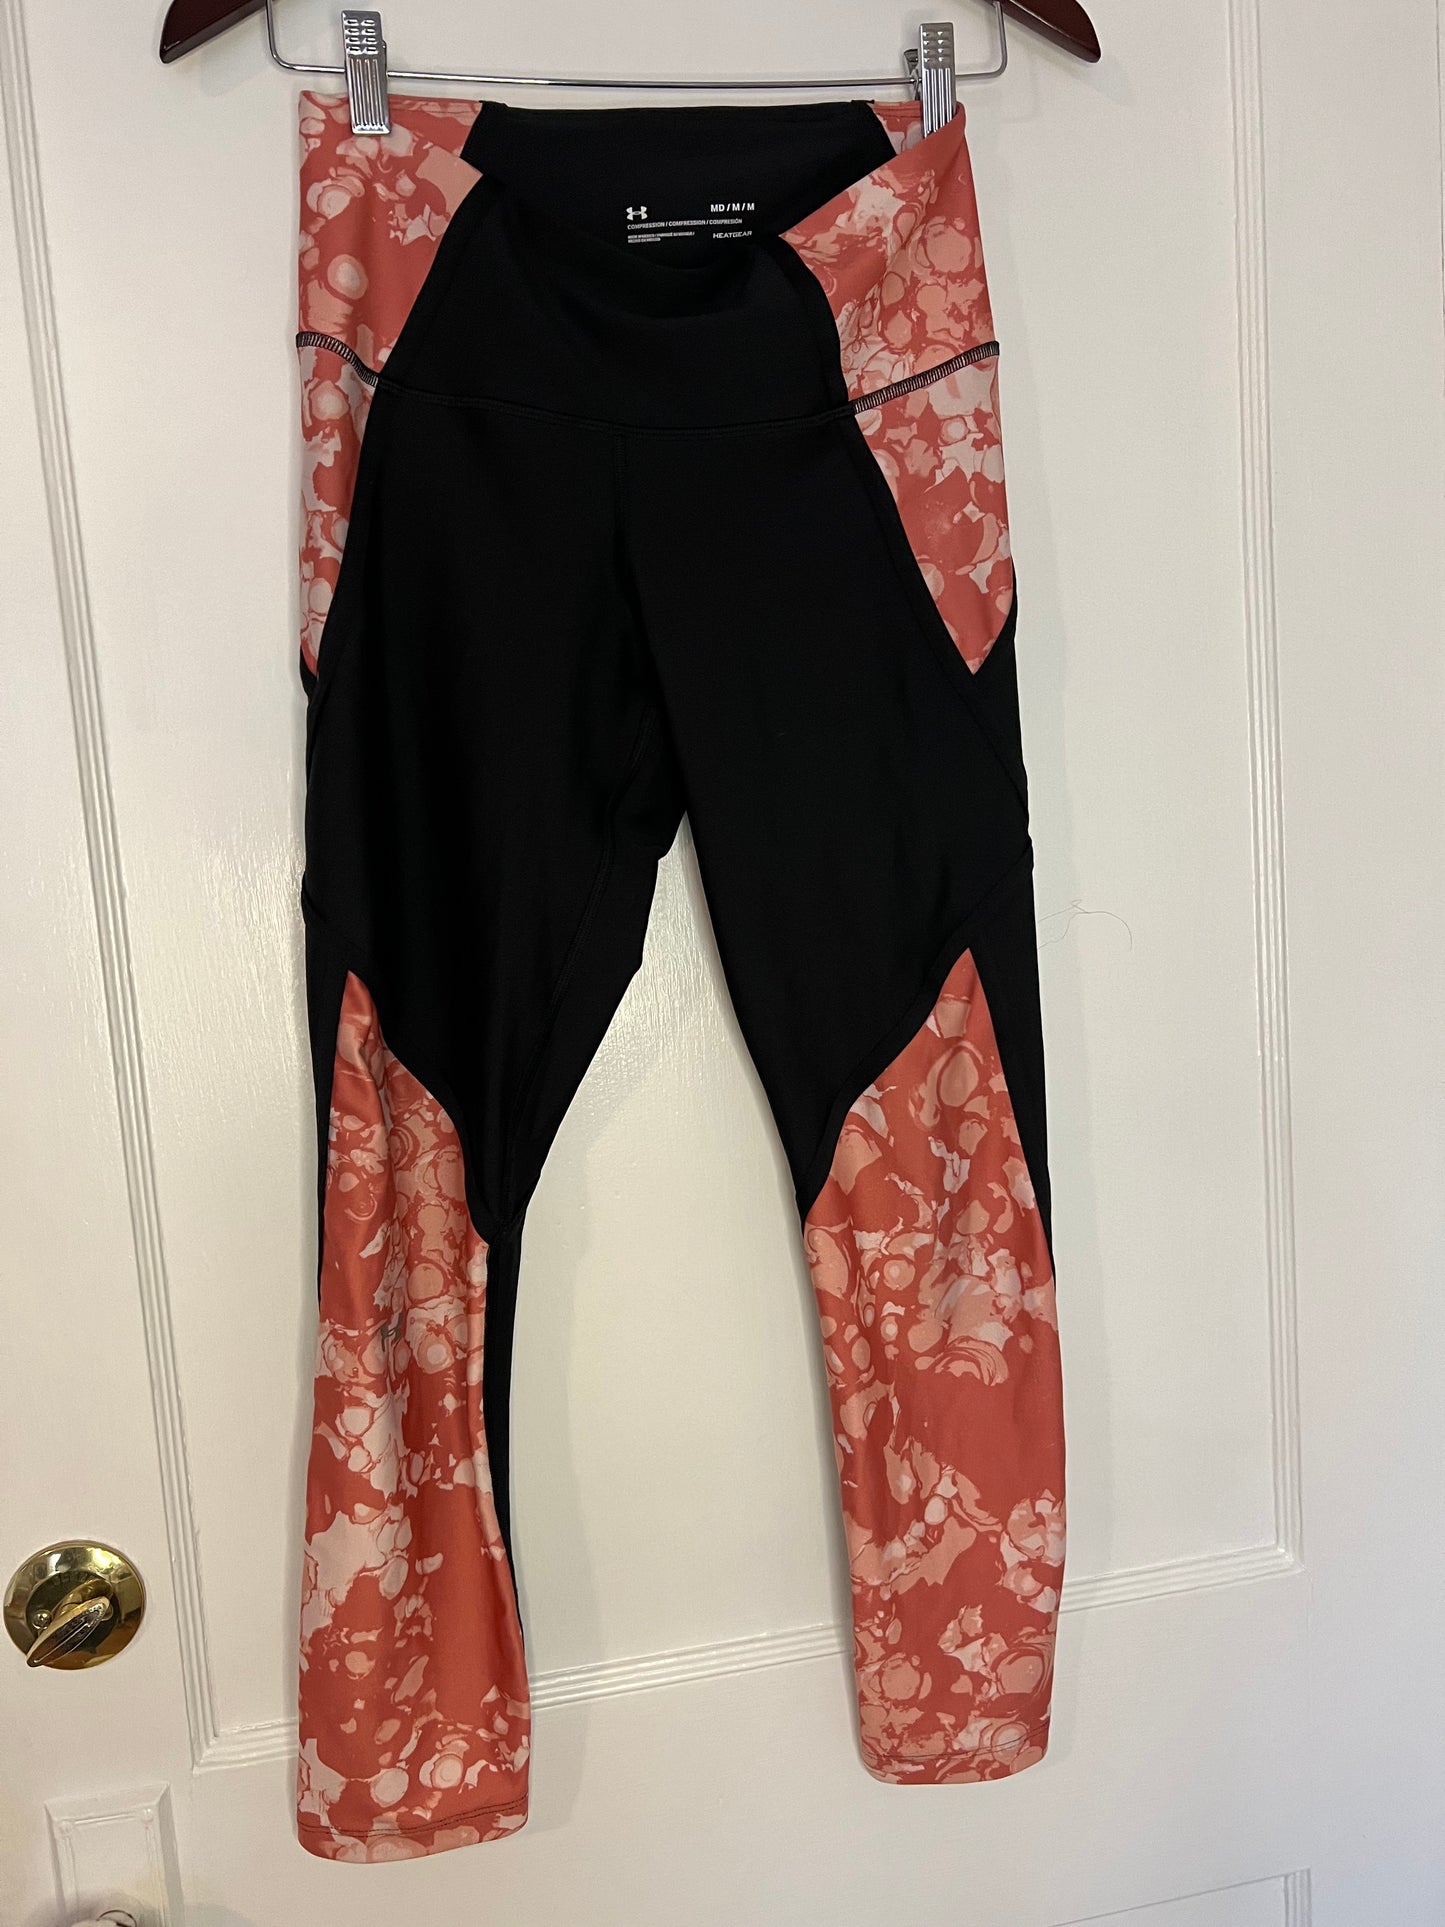 Under Armour Black and Pink Patterned Leggings Size Medium EUC PPU 45208 or Spring Sale